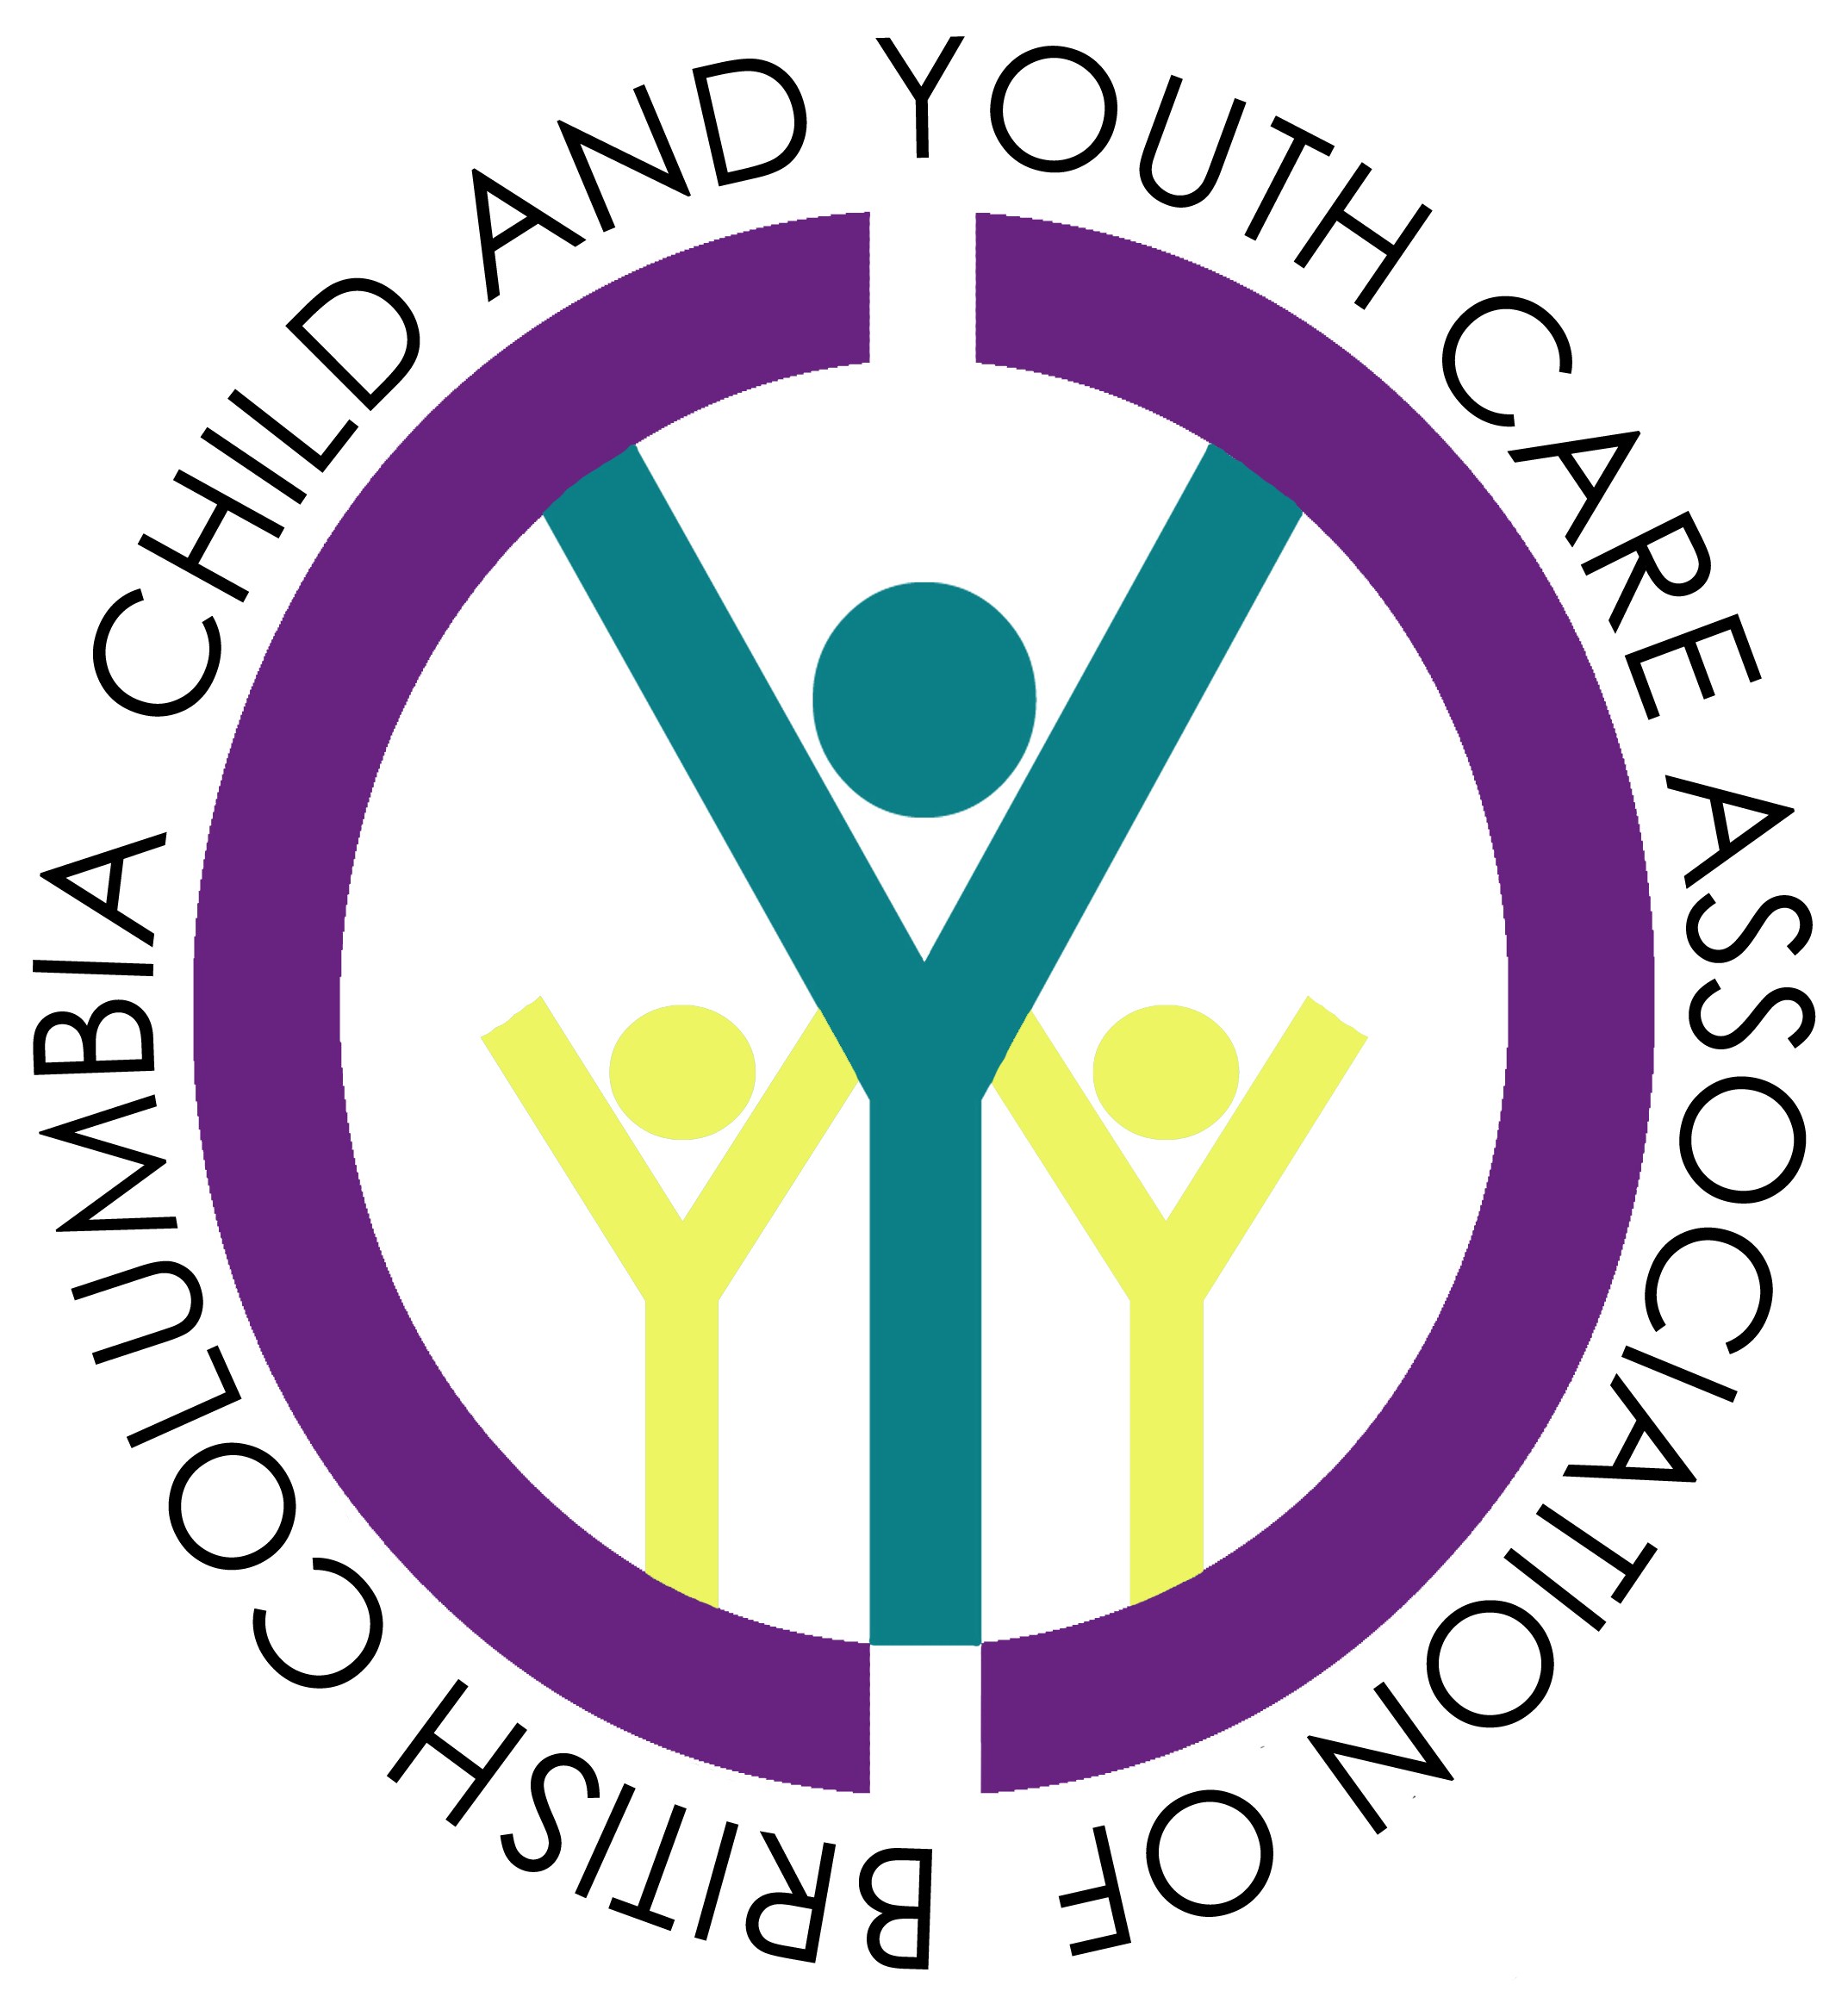 CYCABC Child and Youth Care